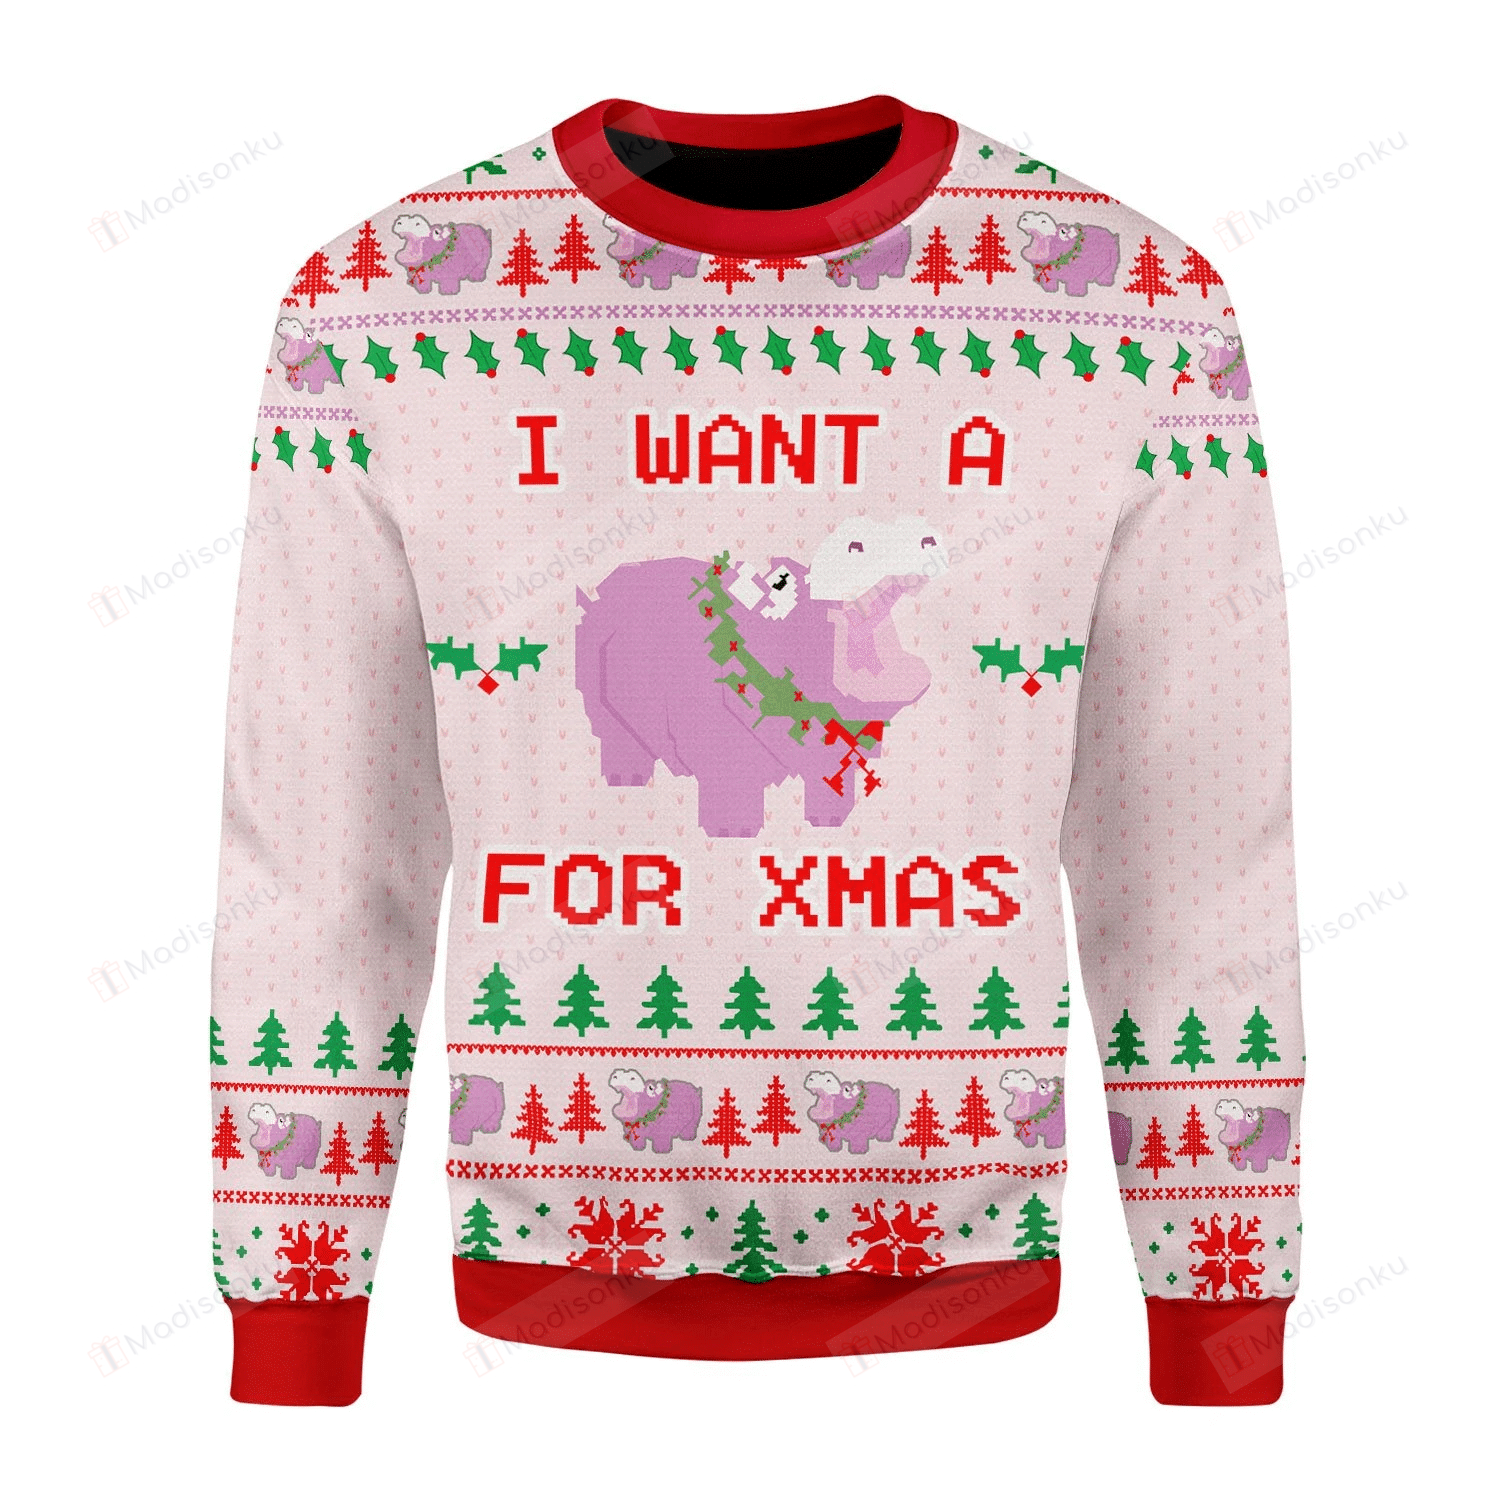 I Want A Hippopotamus For Xmas Ugly Christmas Sweater, All Over Print Sweatshirt.png